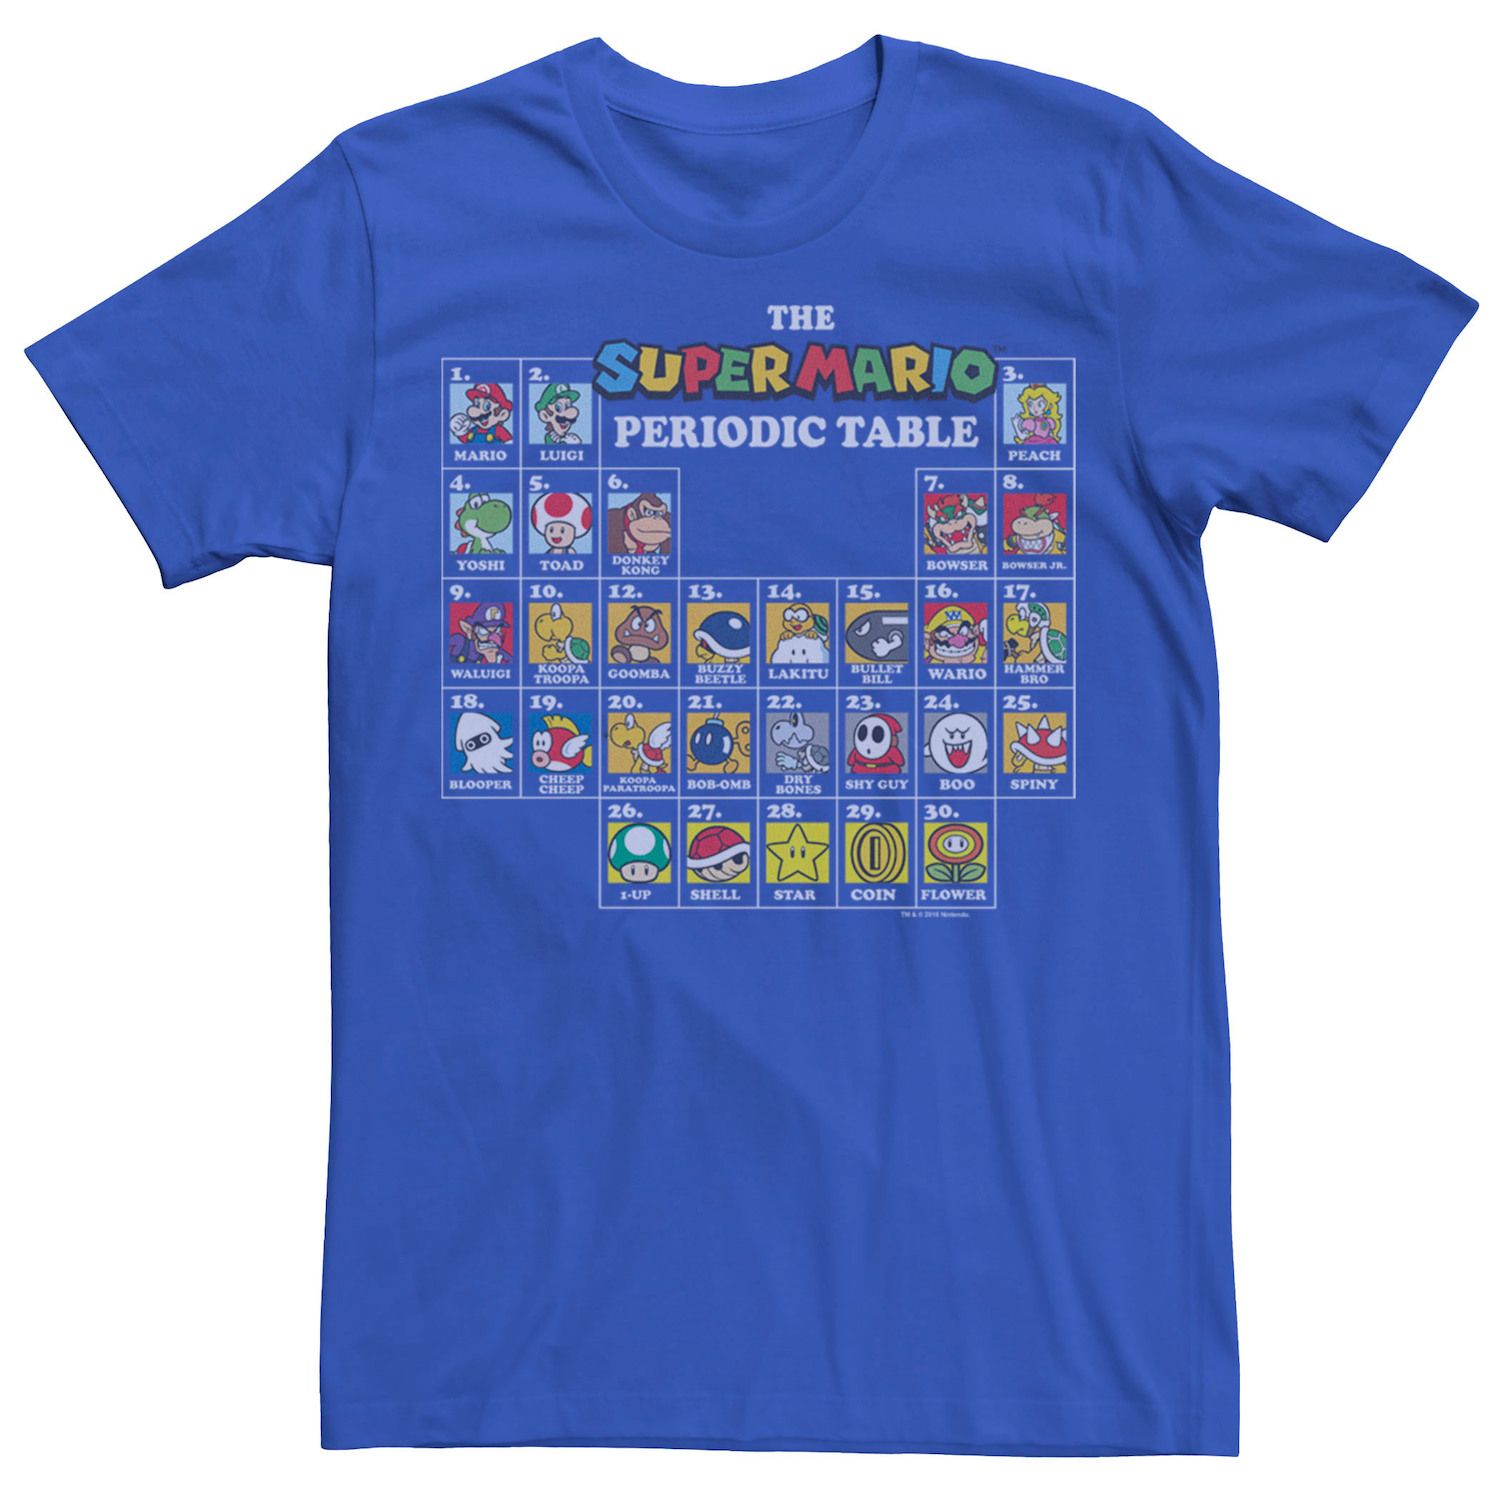 Image for Licensed Character Men's Nintendo Super Mario Periodic Table Of Characters Tee at Kohl's.